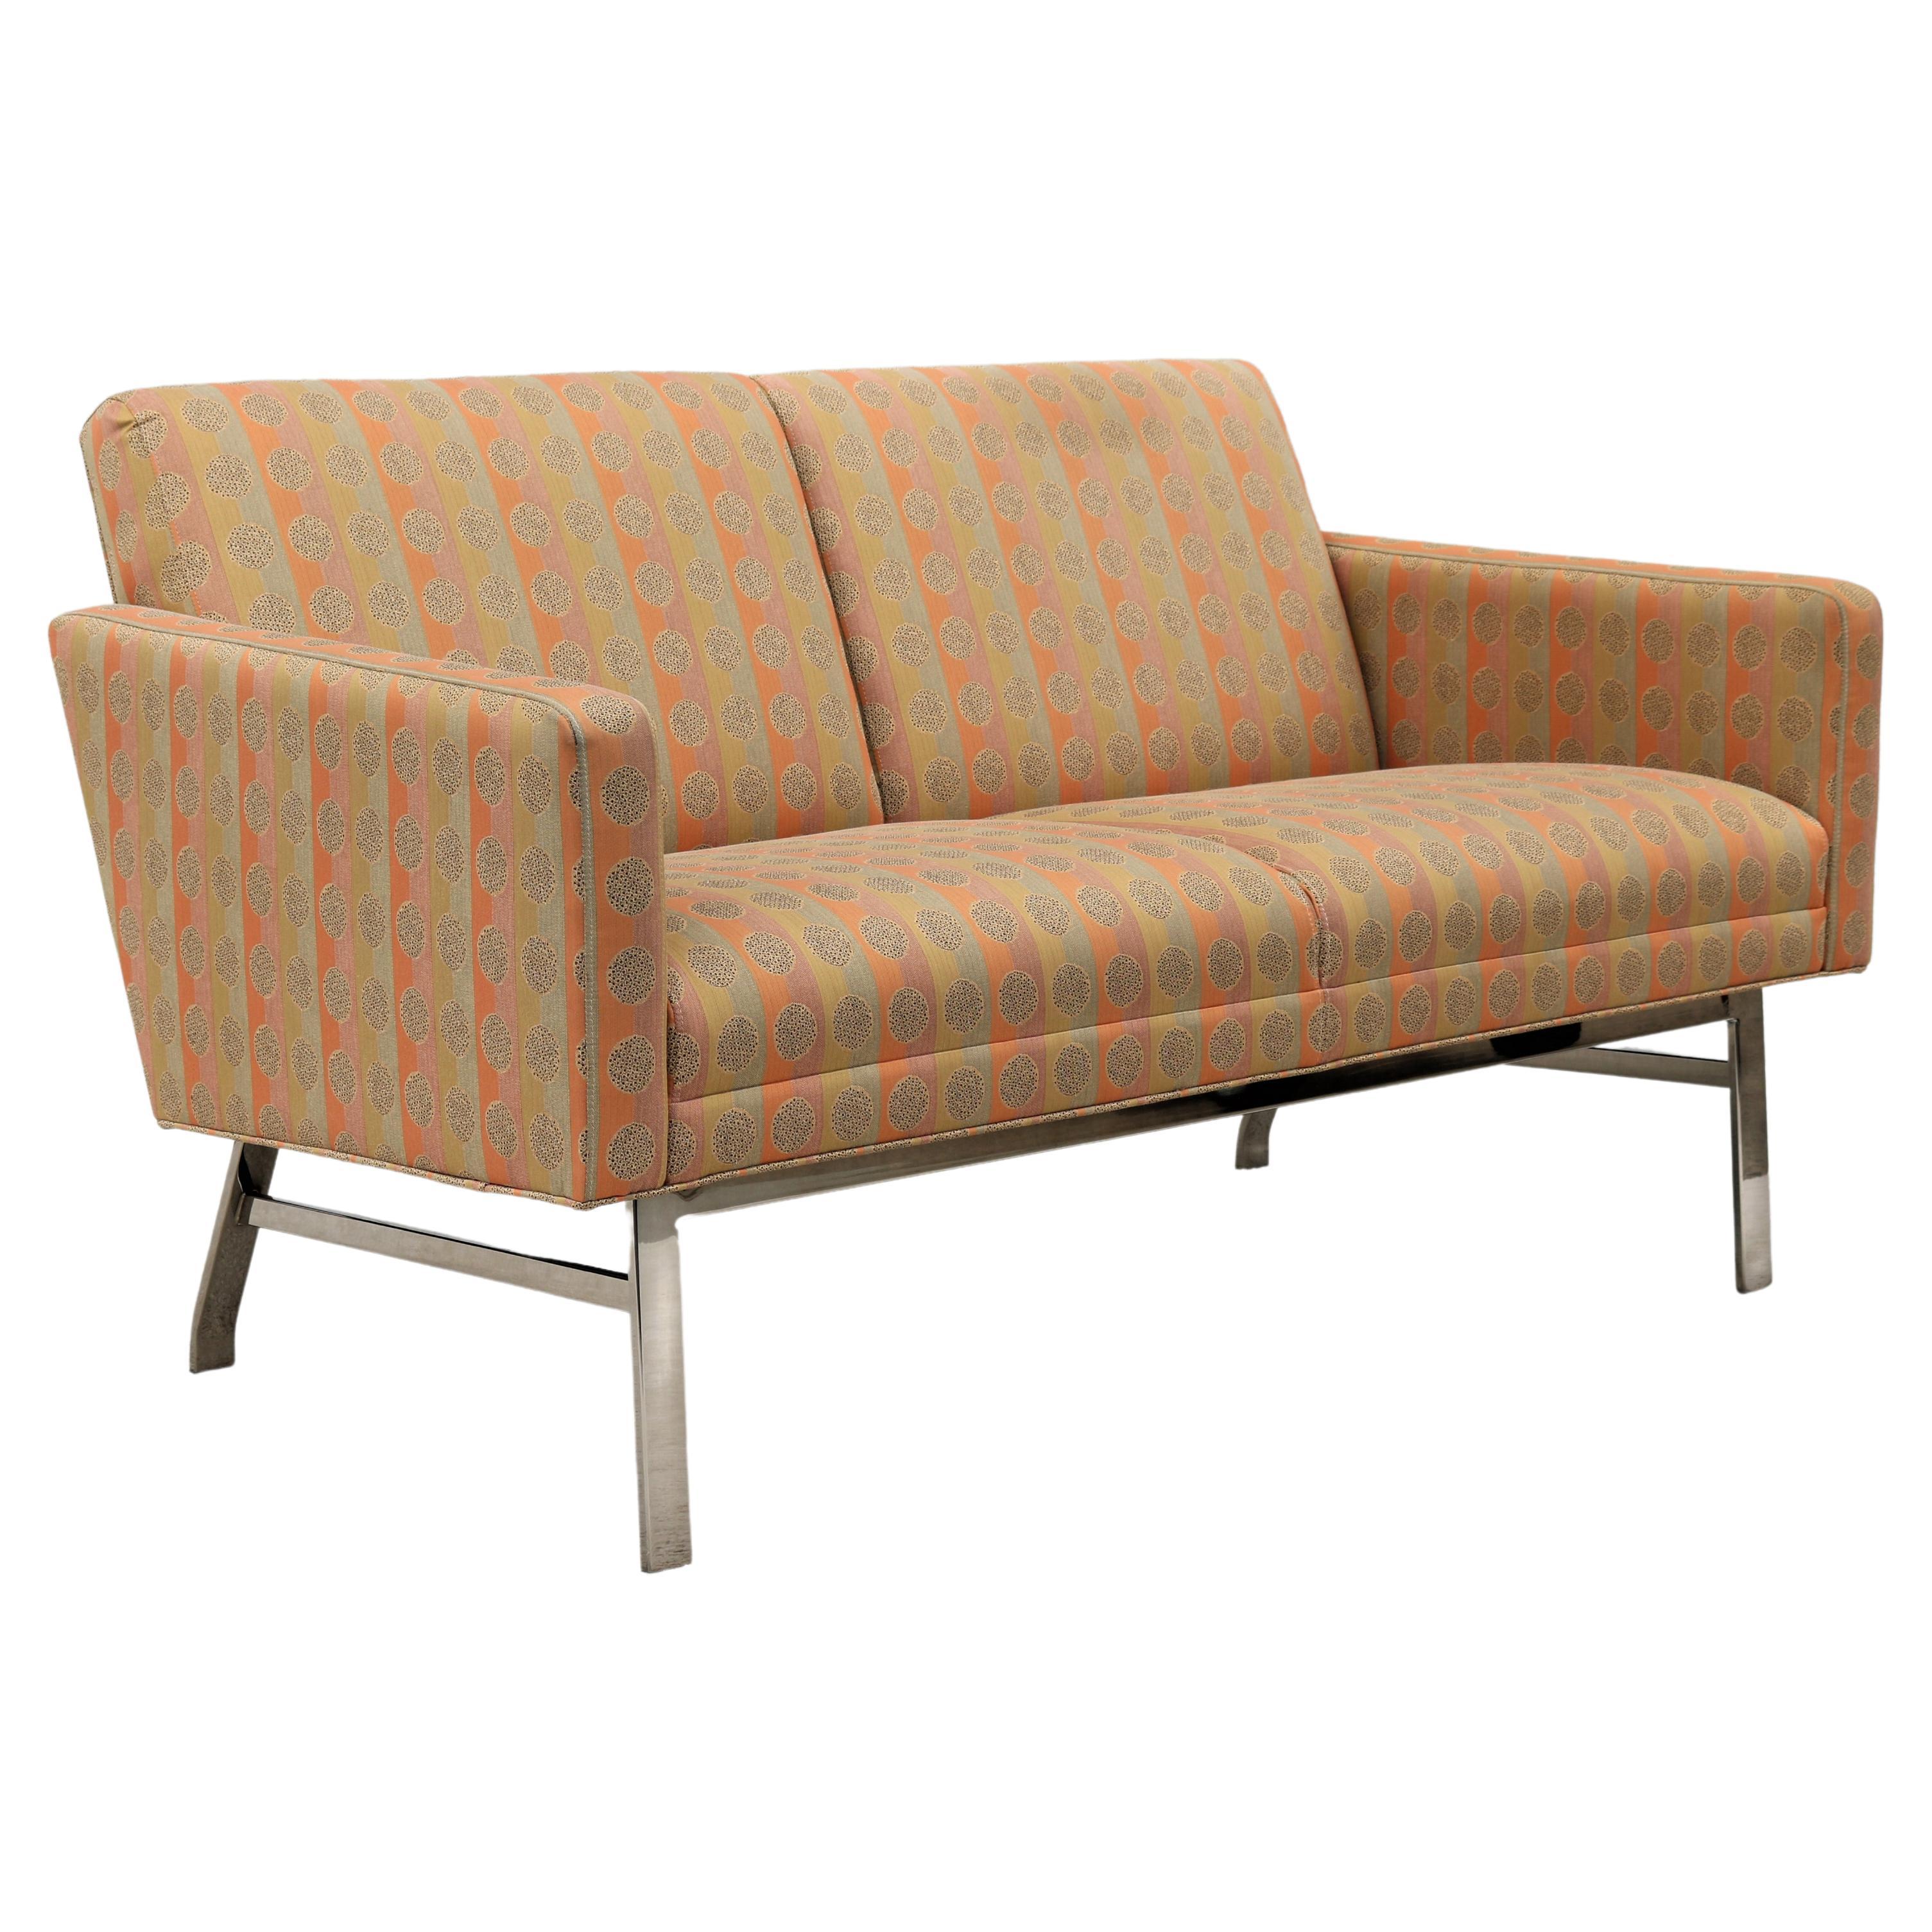 Mid-Century Modern Style Jack Cartwright Kelly Settee 2 Seats Sofa, 2 Available For Sale